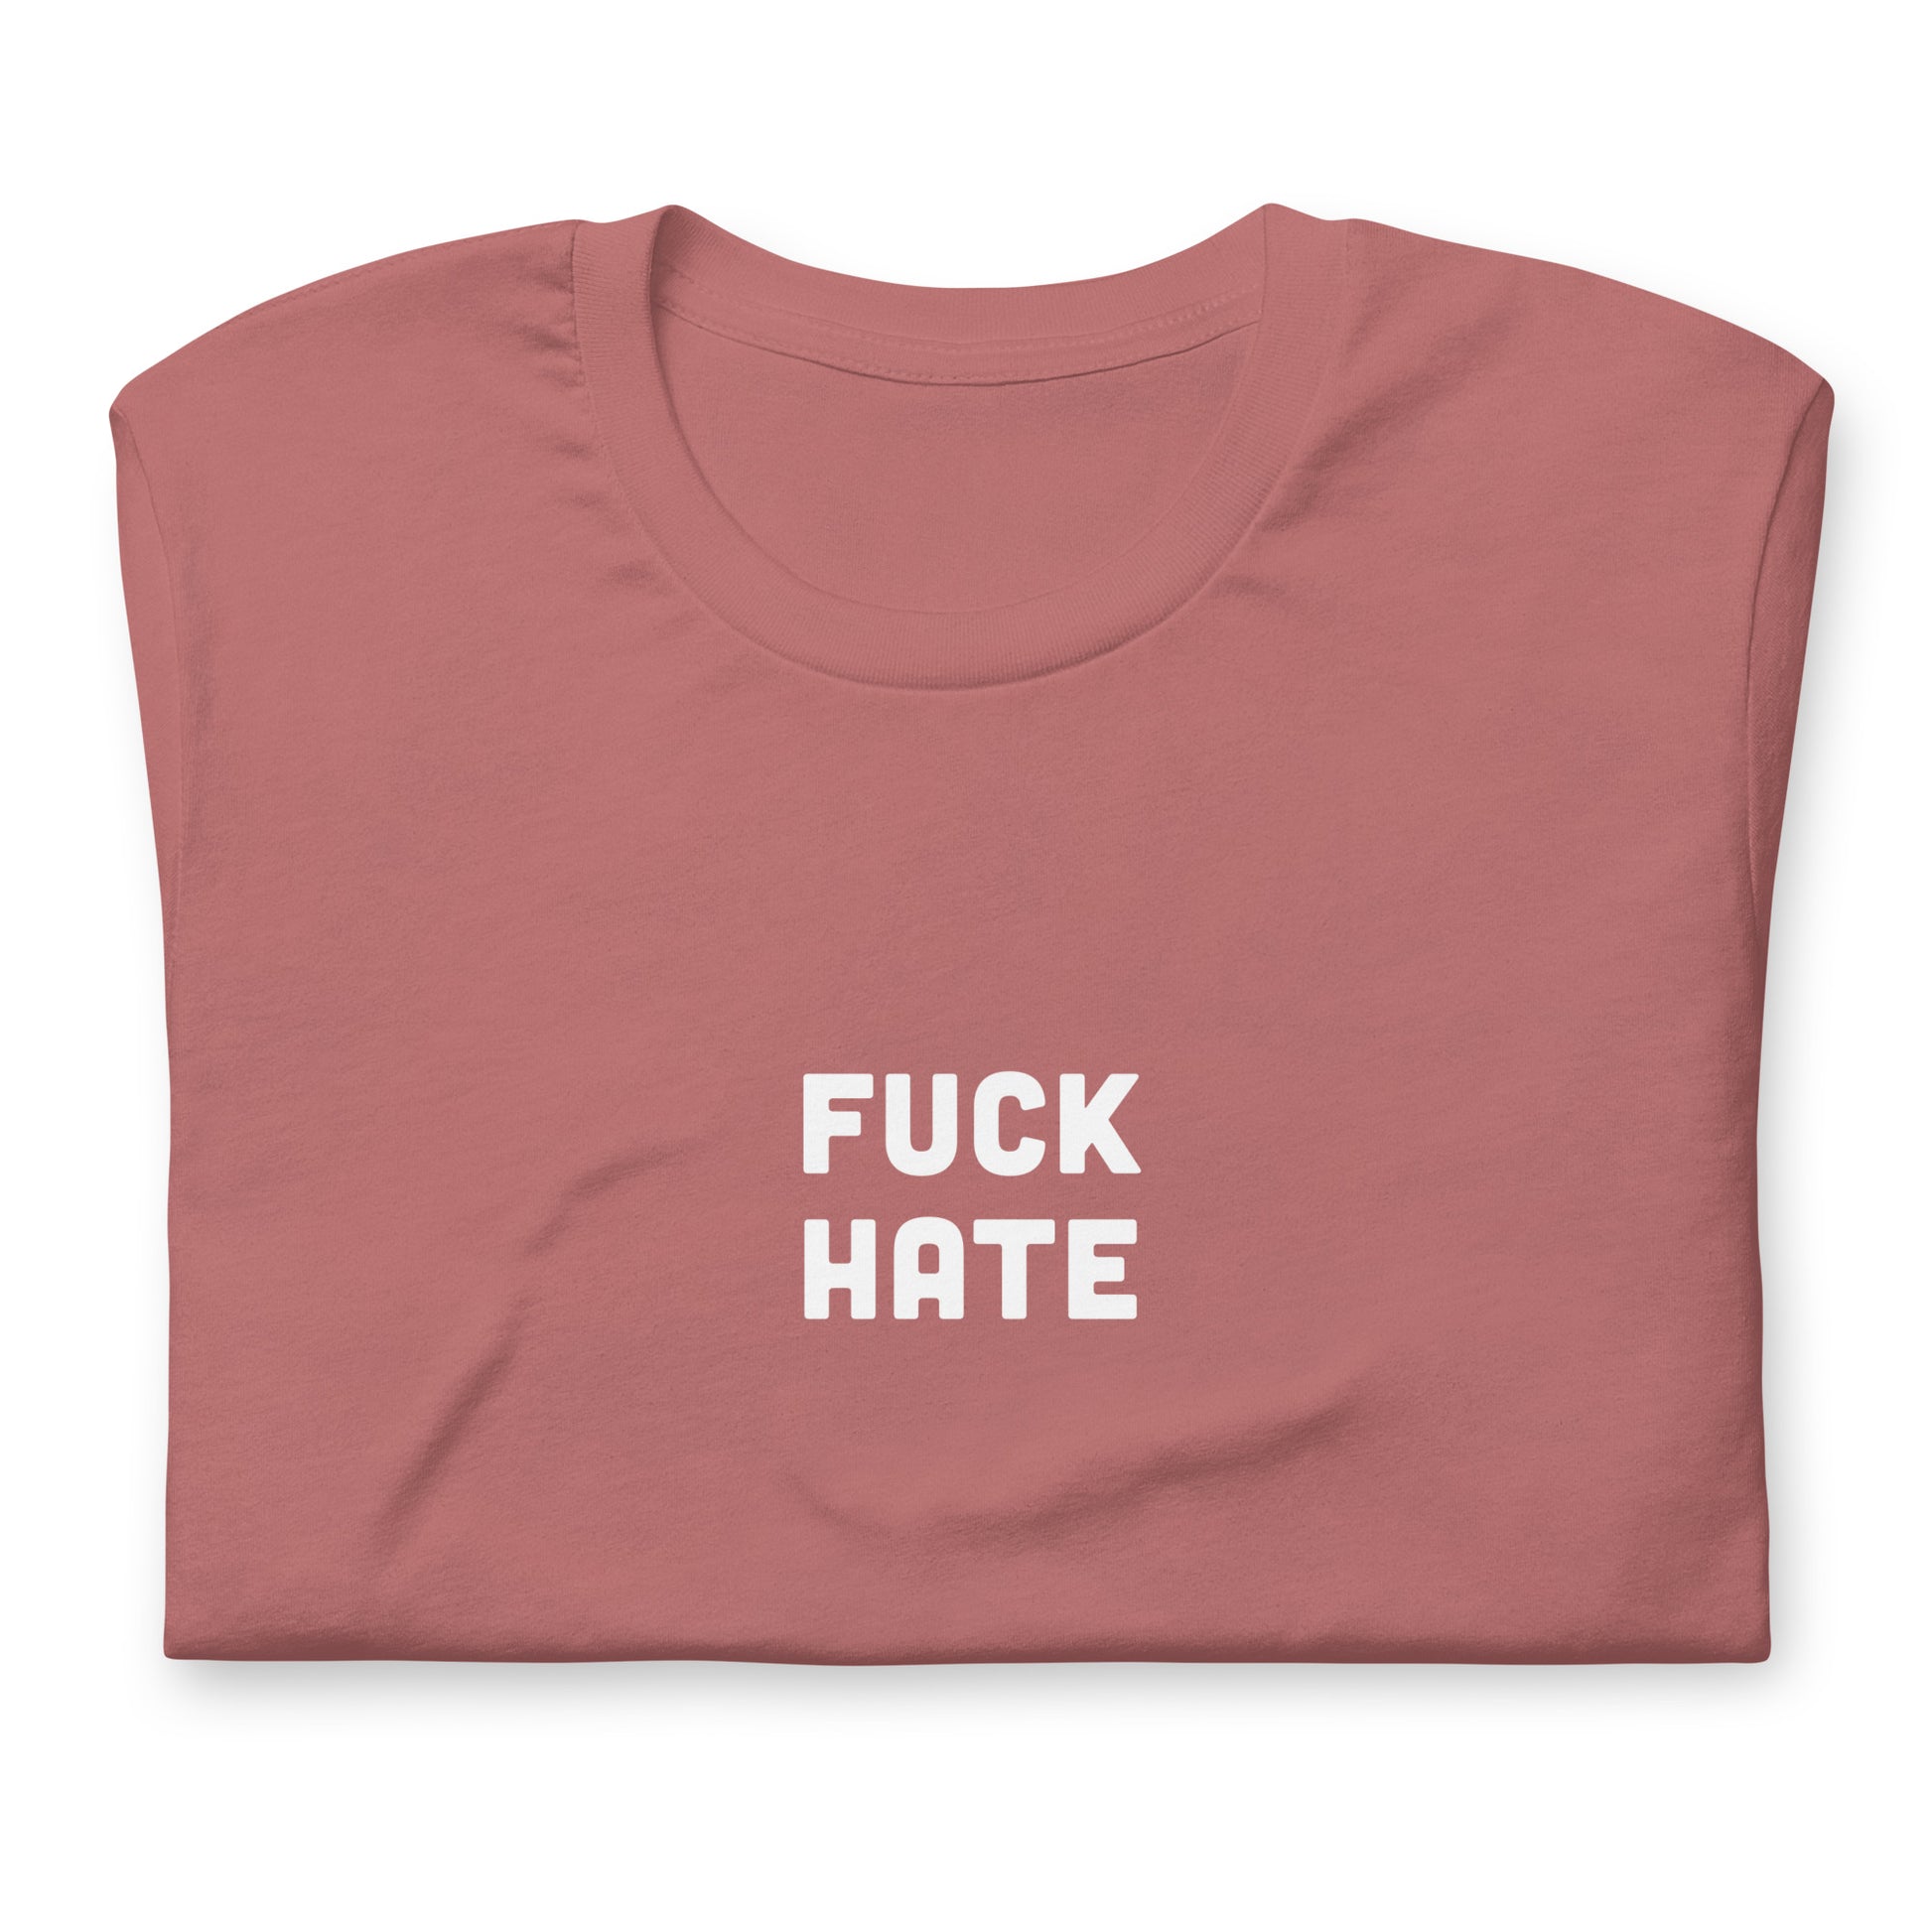 Fuck Hate T-Shirt Size XL Color Navy